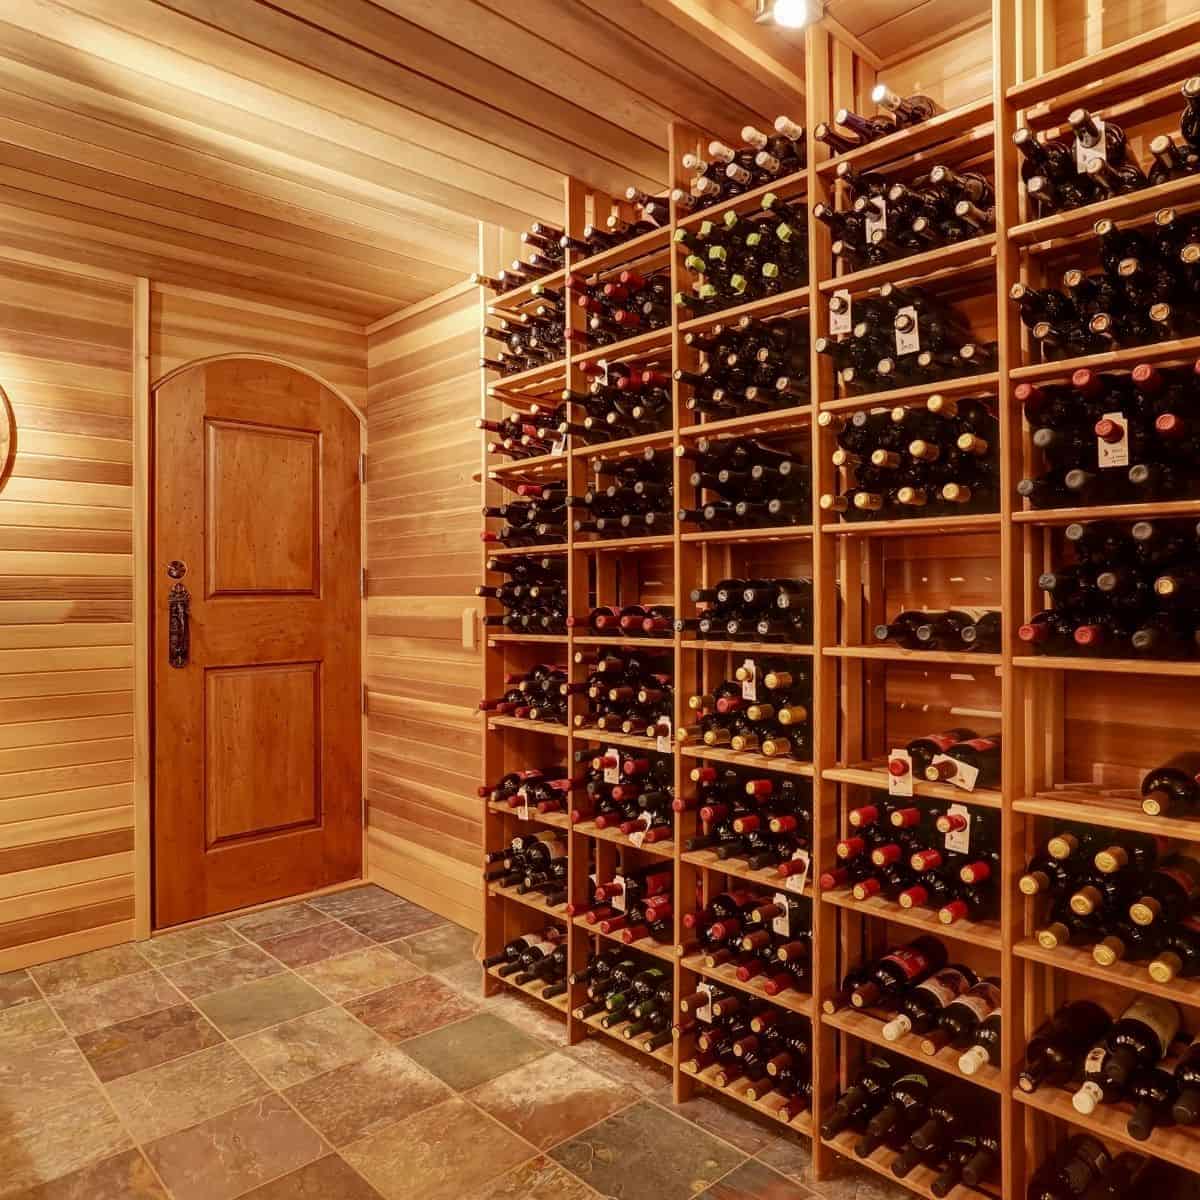 How To Build A Wine Cellar In 10 Steps | Honest Food Talks